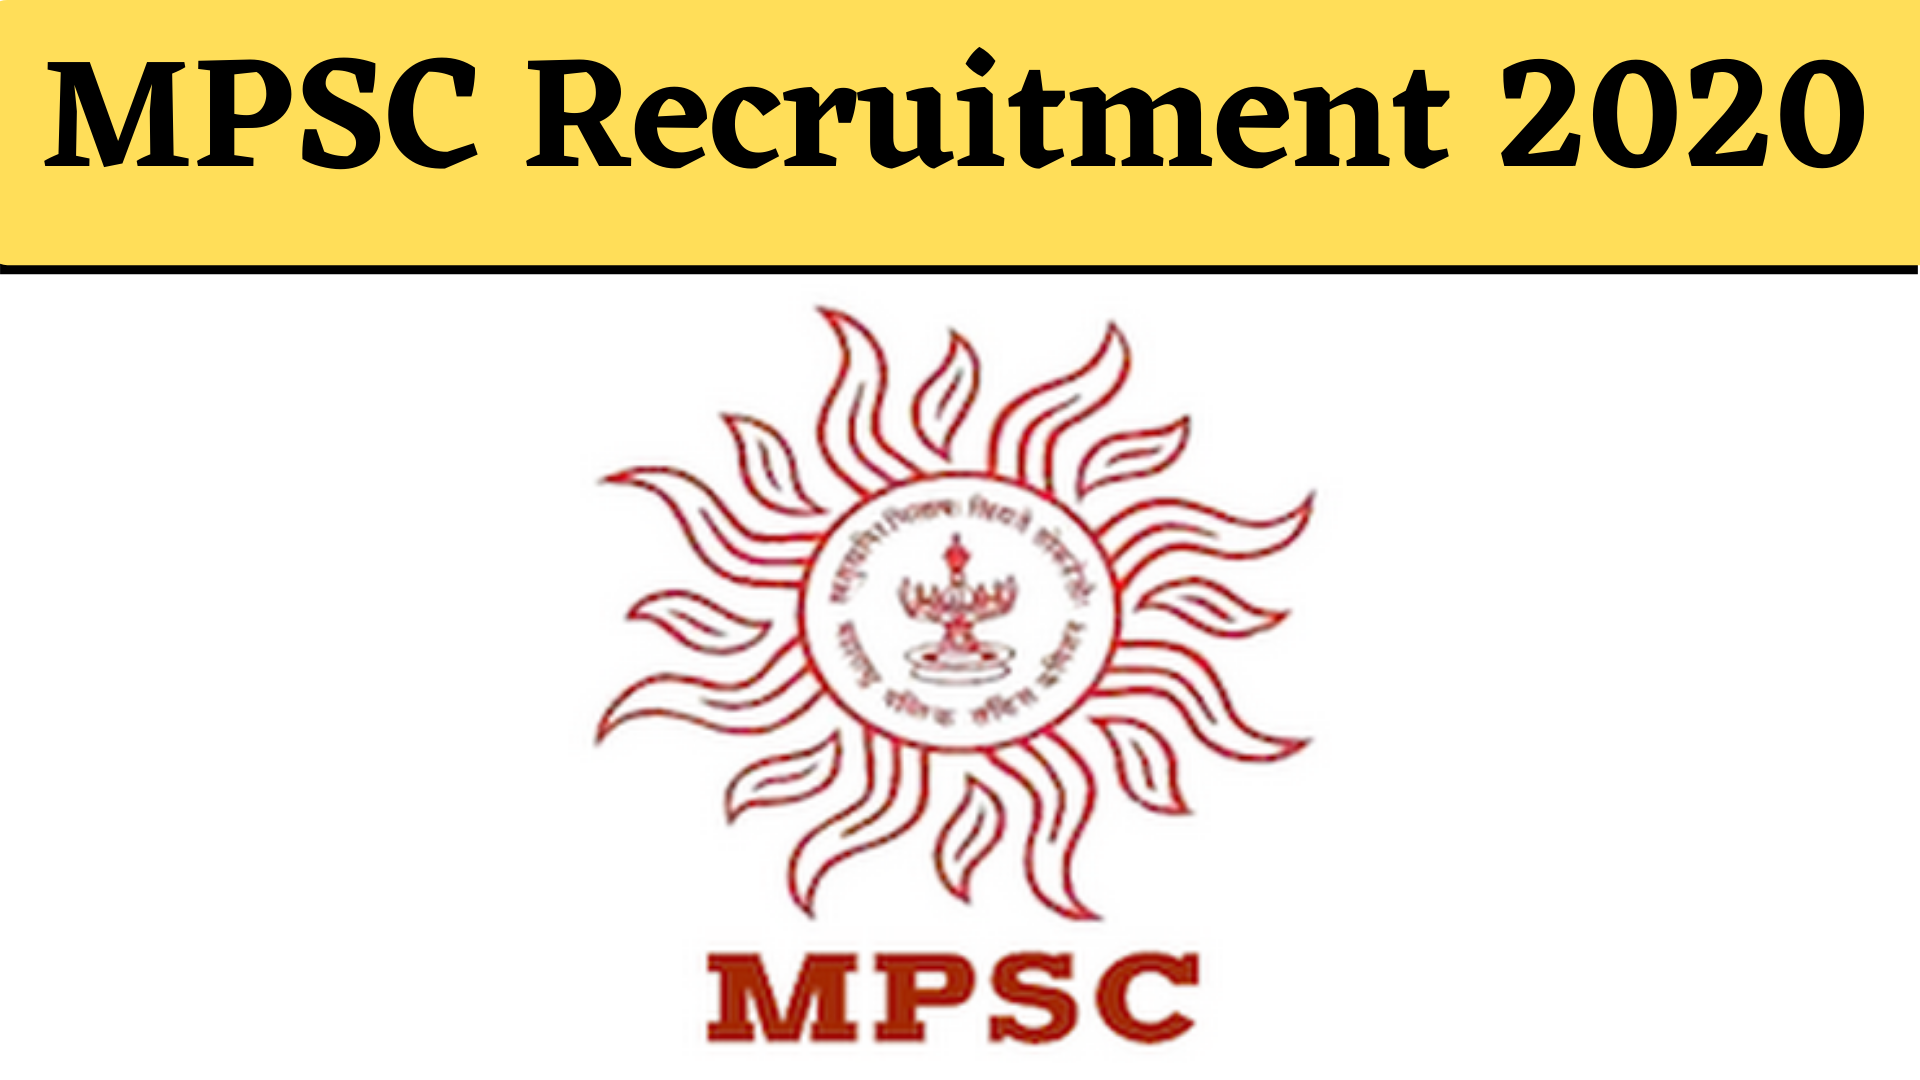 MPSC has released the MPSC exam 2020 notification at the official site https://mahampsc.mahaonline.gov.in/. Download the official notification ...